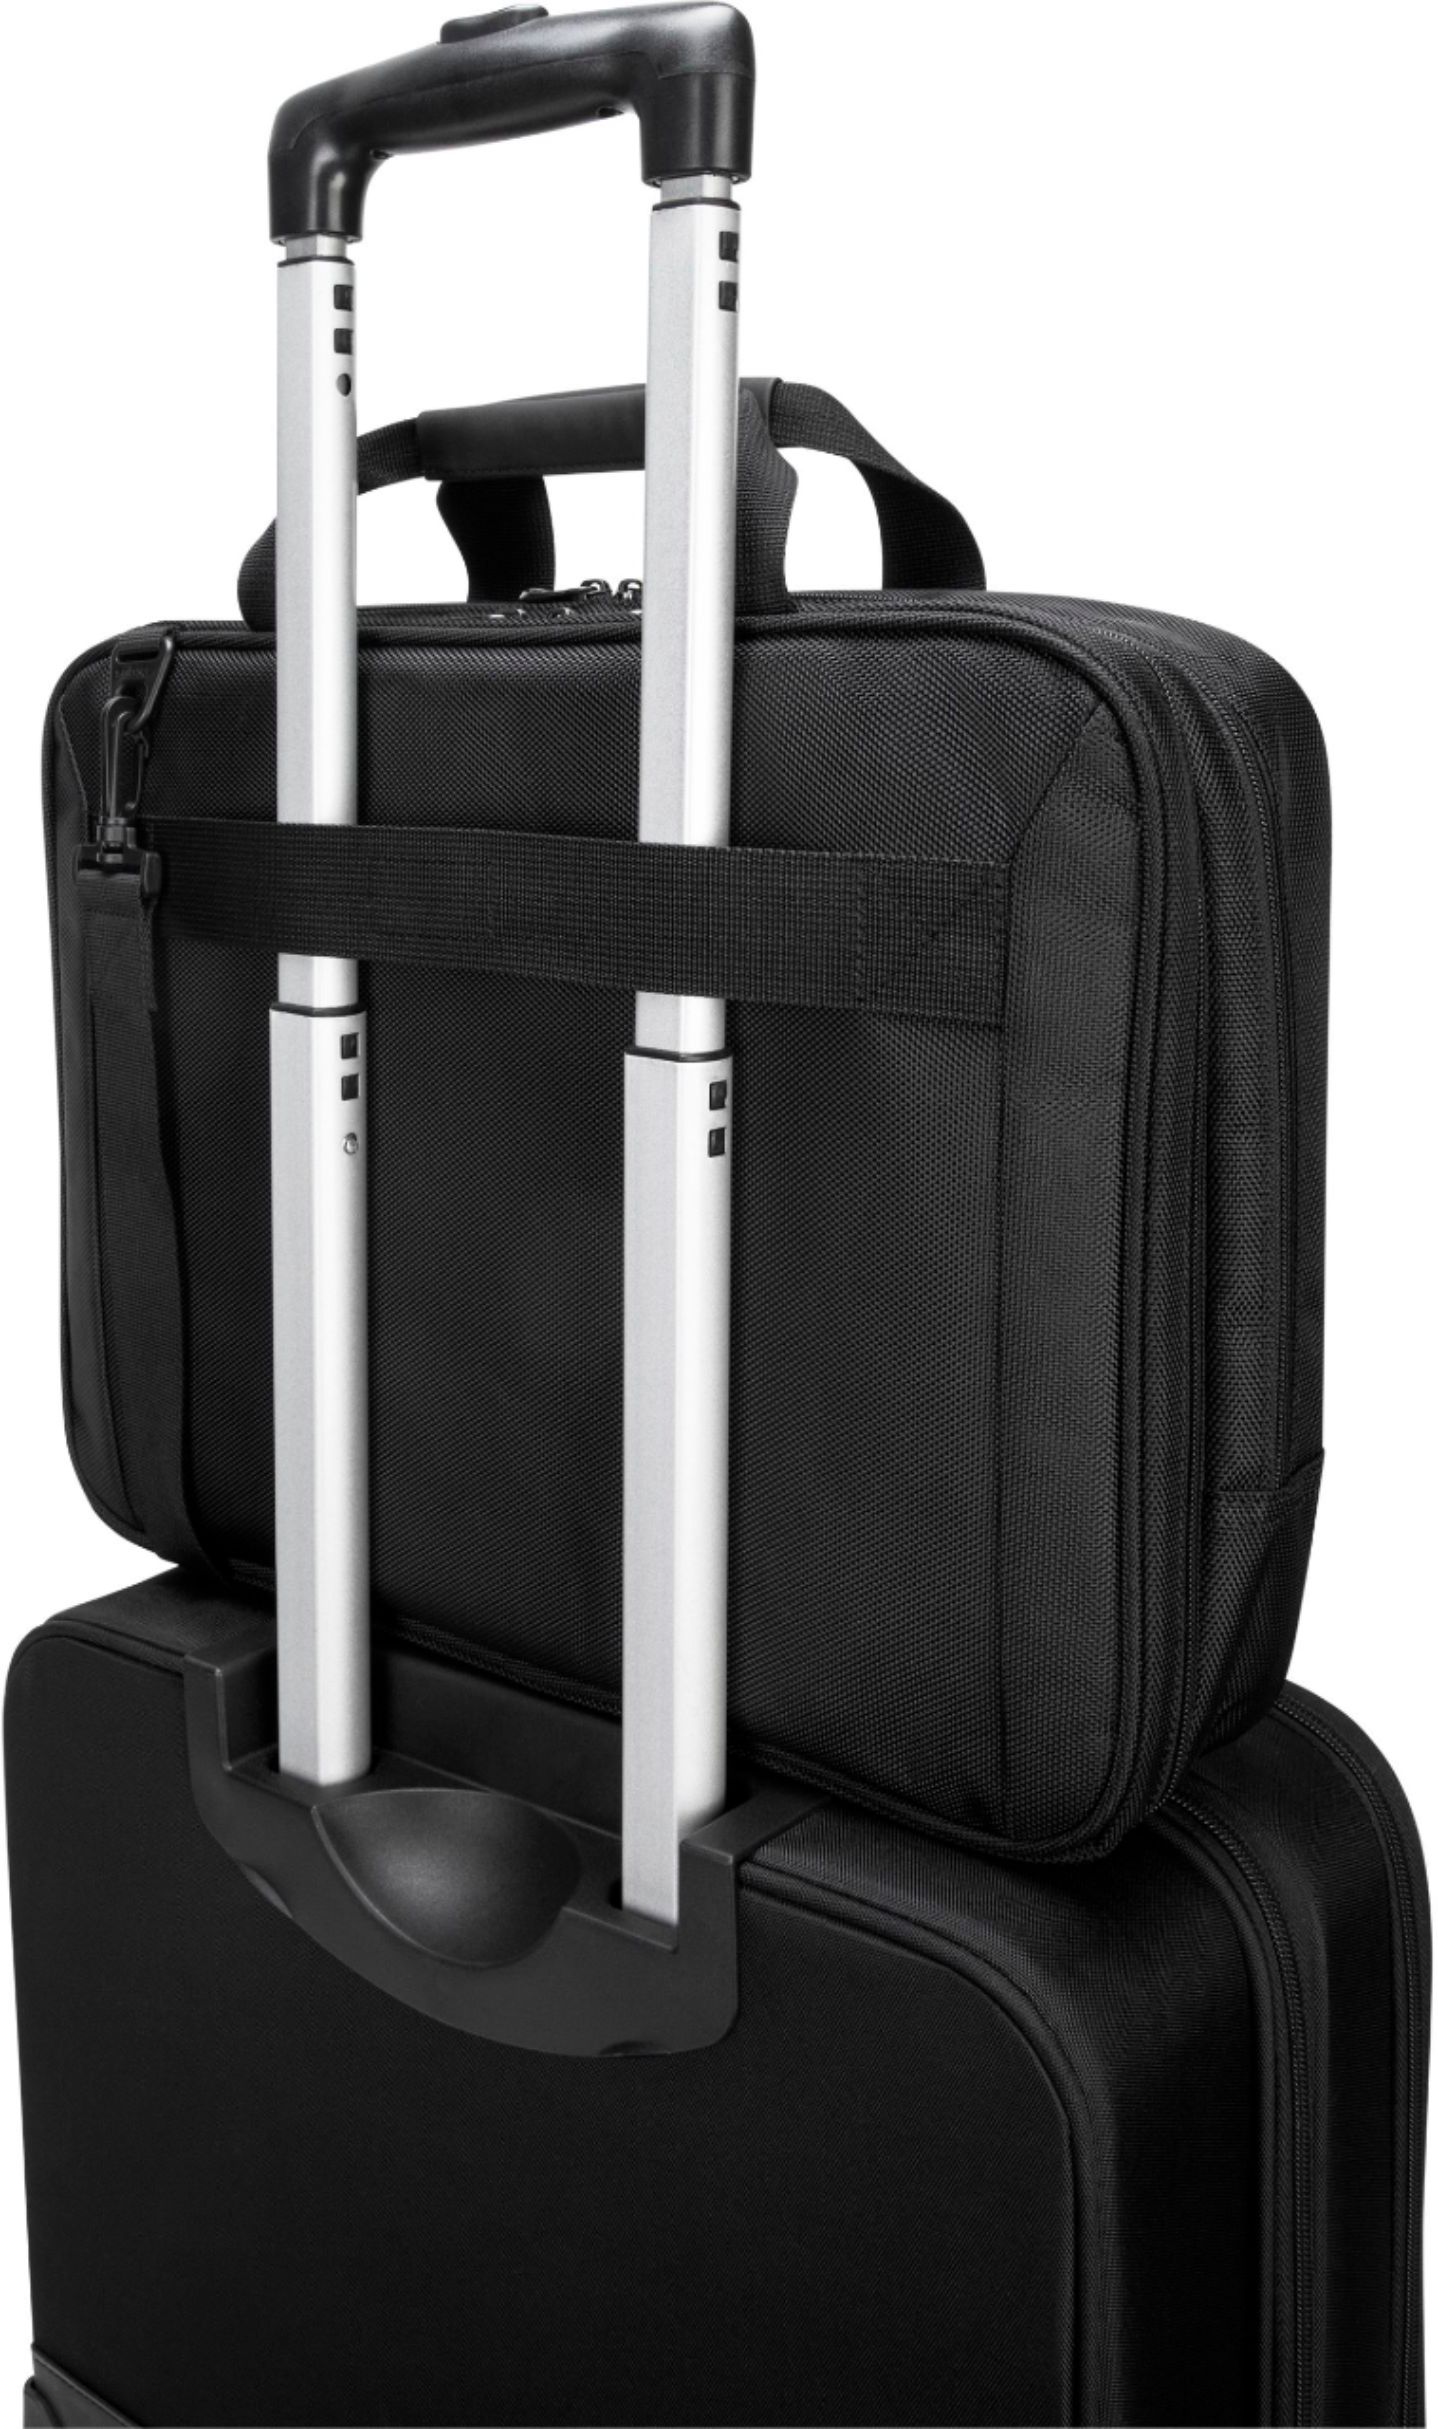 Questions and Answers: Targus CityLite Laptop Case for 15.4